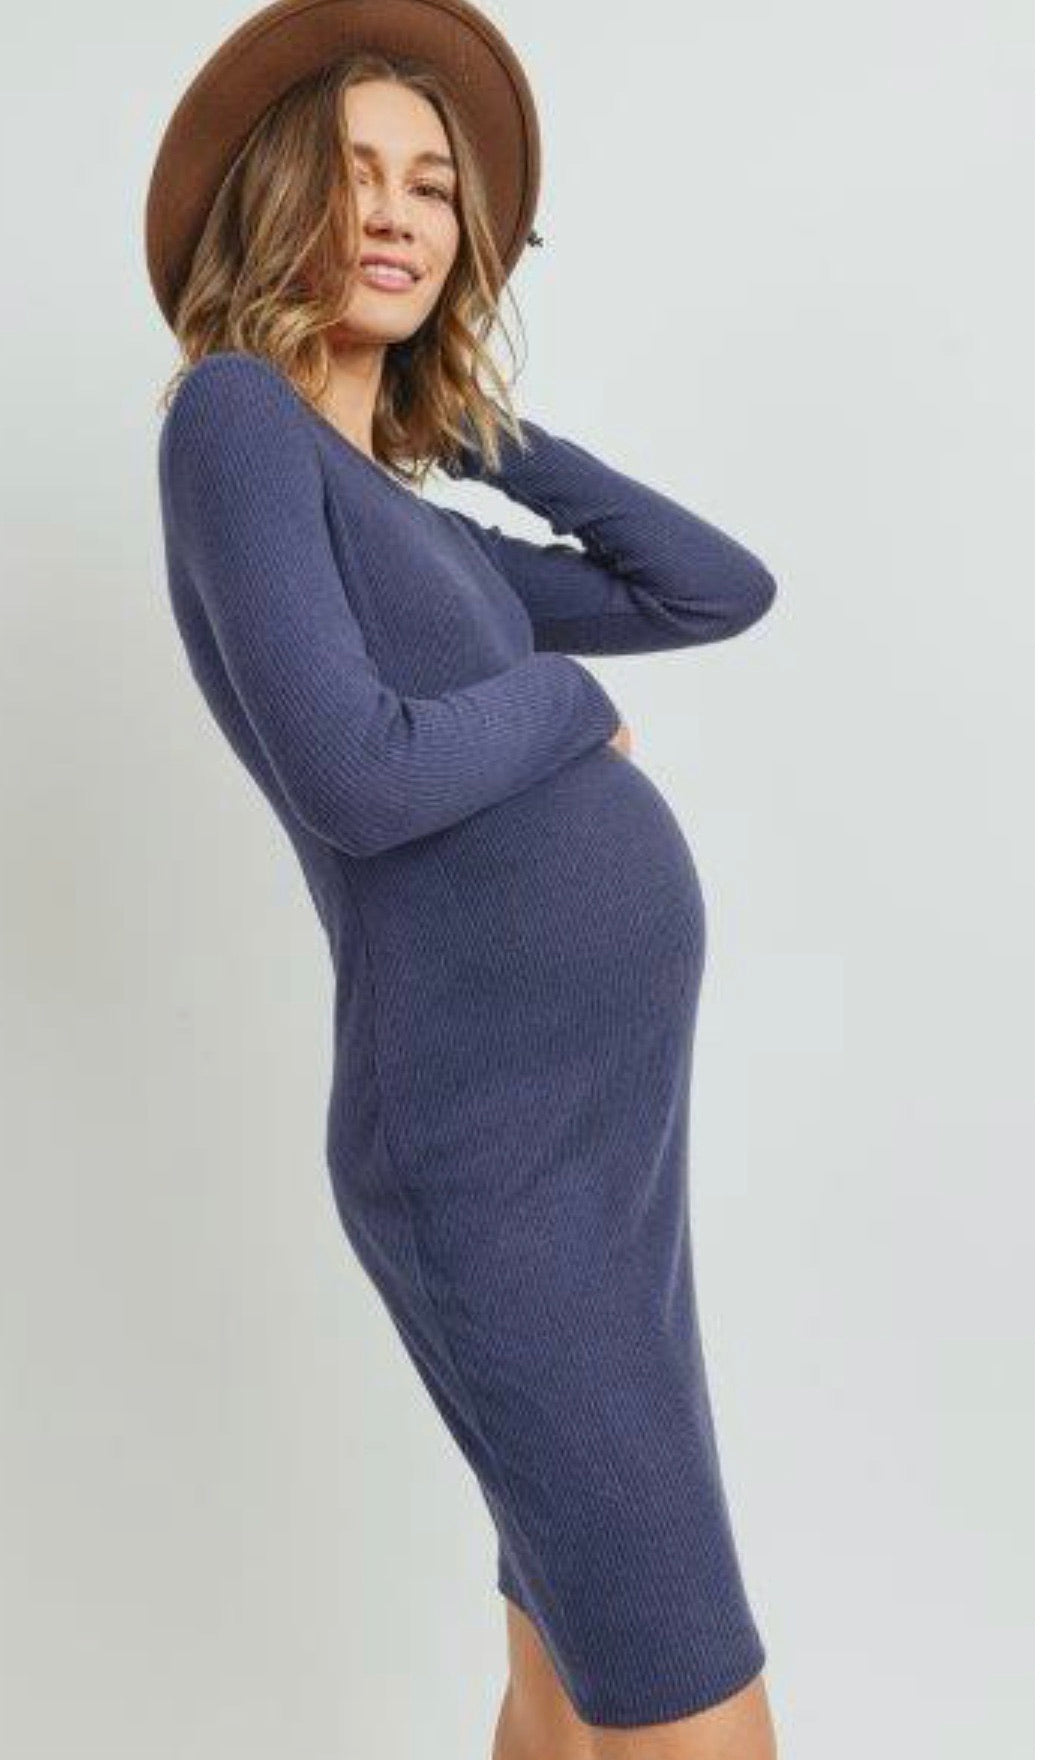 The Lexi Maternity dress in Navy